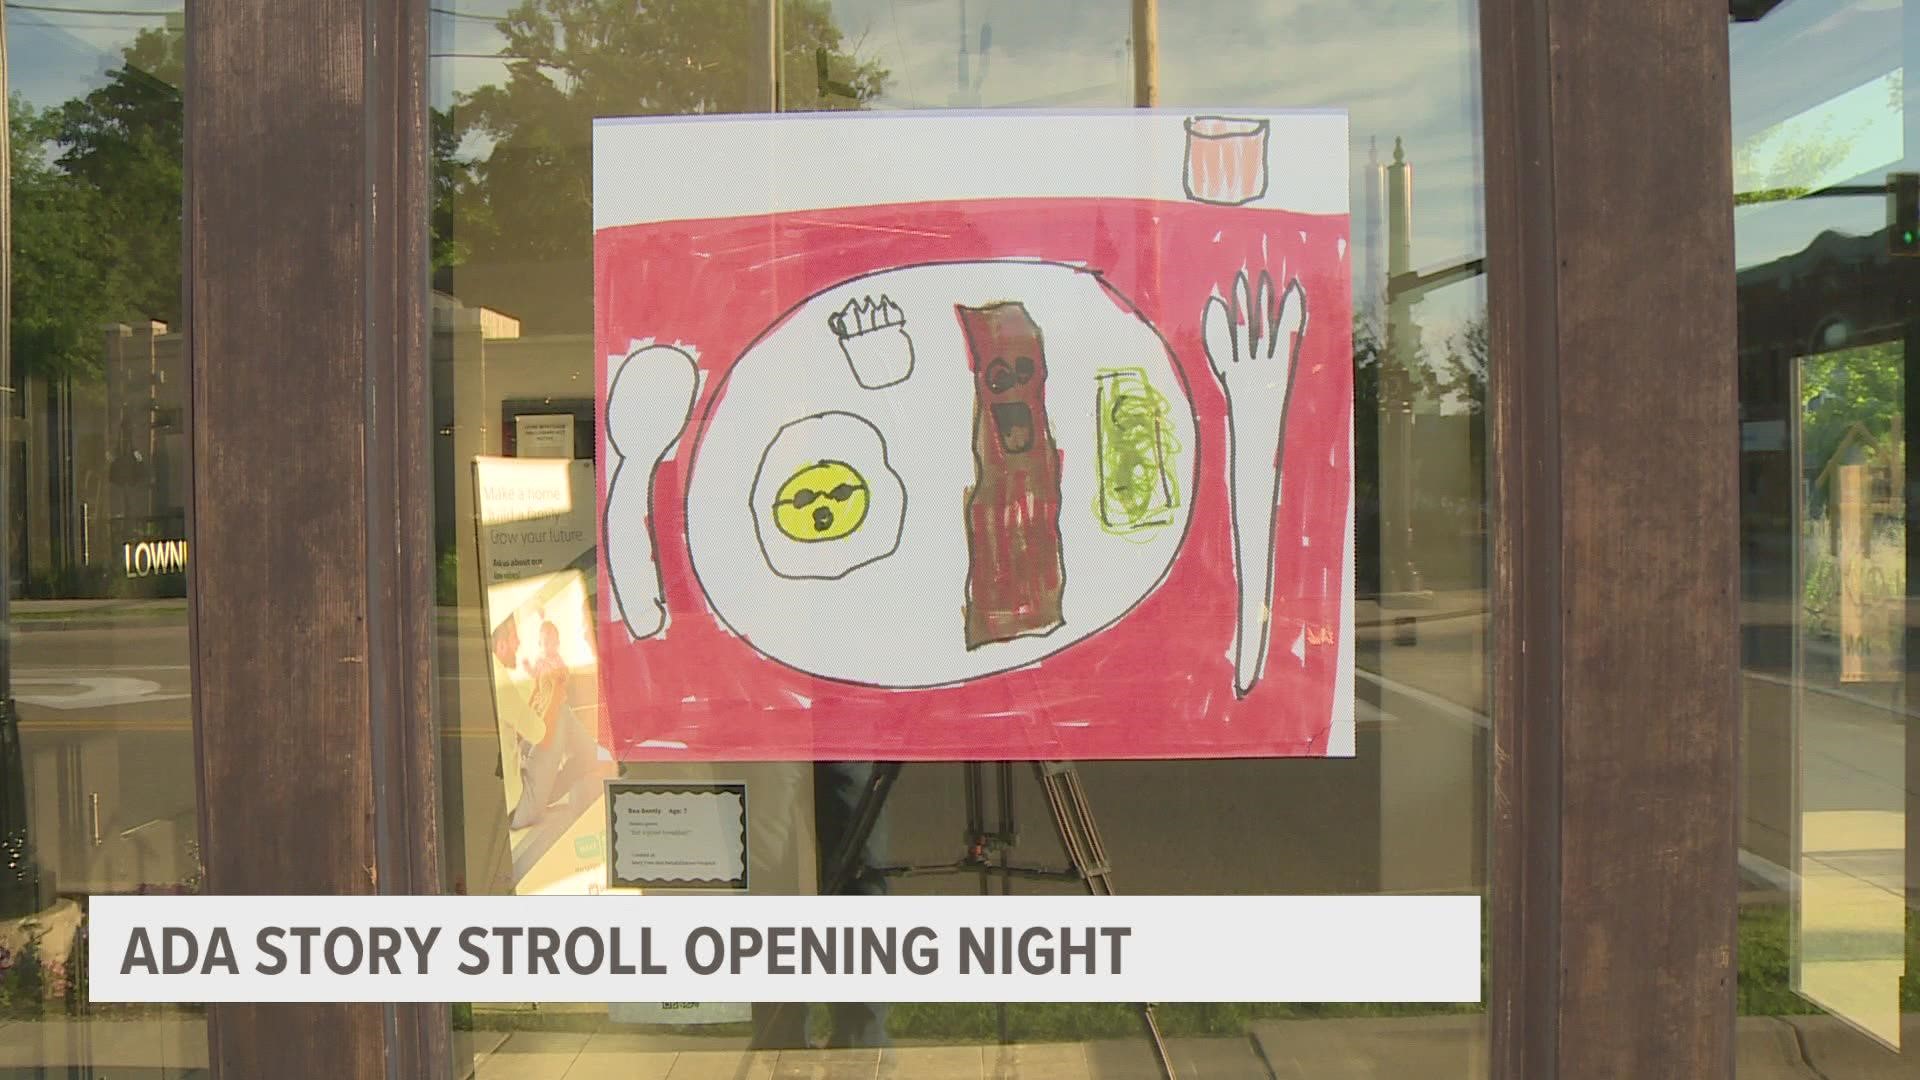 It's opening night for the Ada Story Stroll at 5:30 p.m.